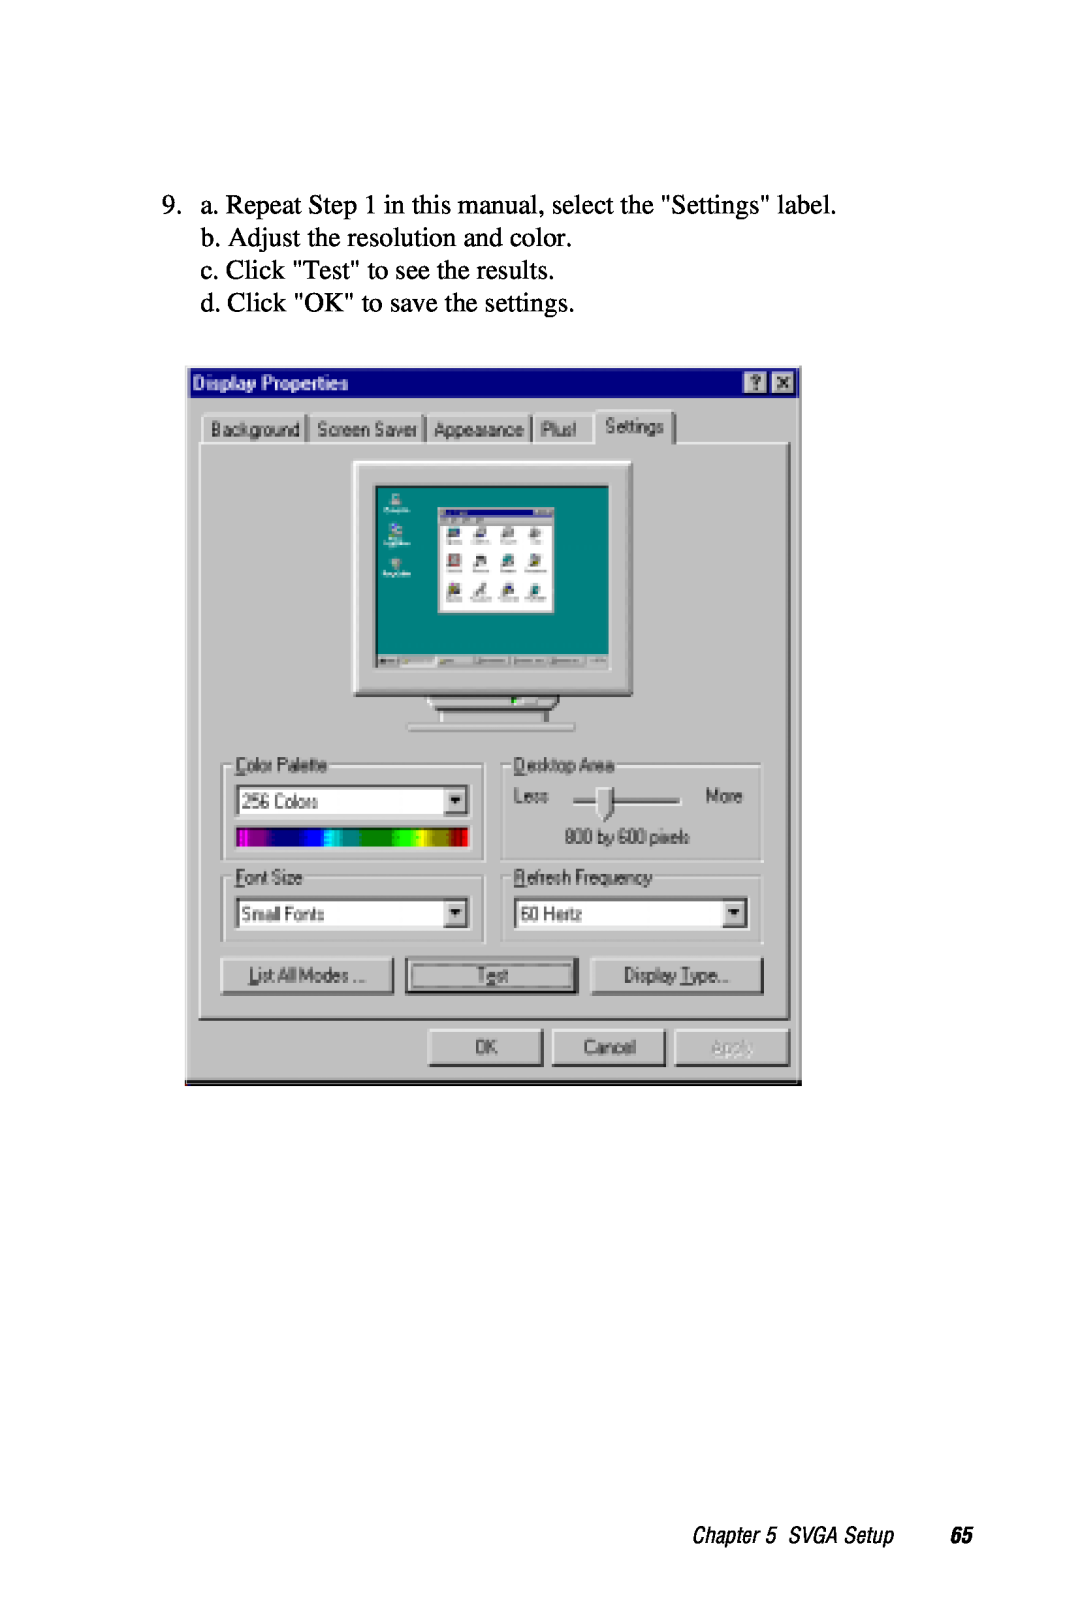 AMD PCM-5820 9. a. Repeat in this manual, select the Settings label, d. Click OK to save the settings, SVGA Setup 